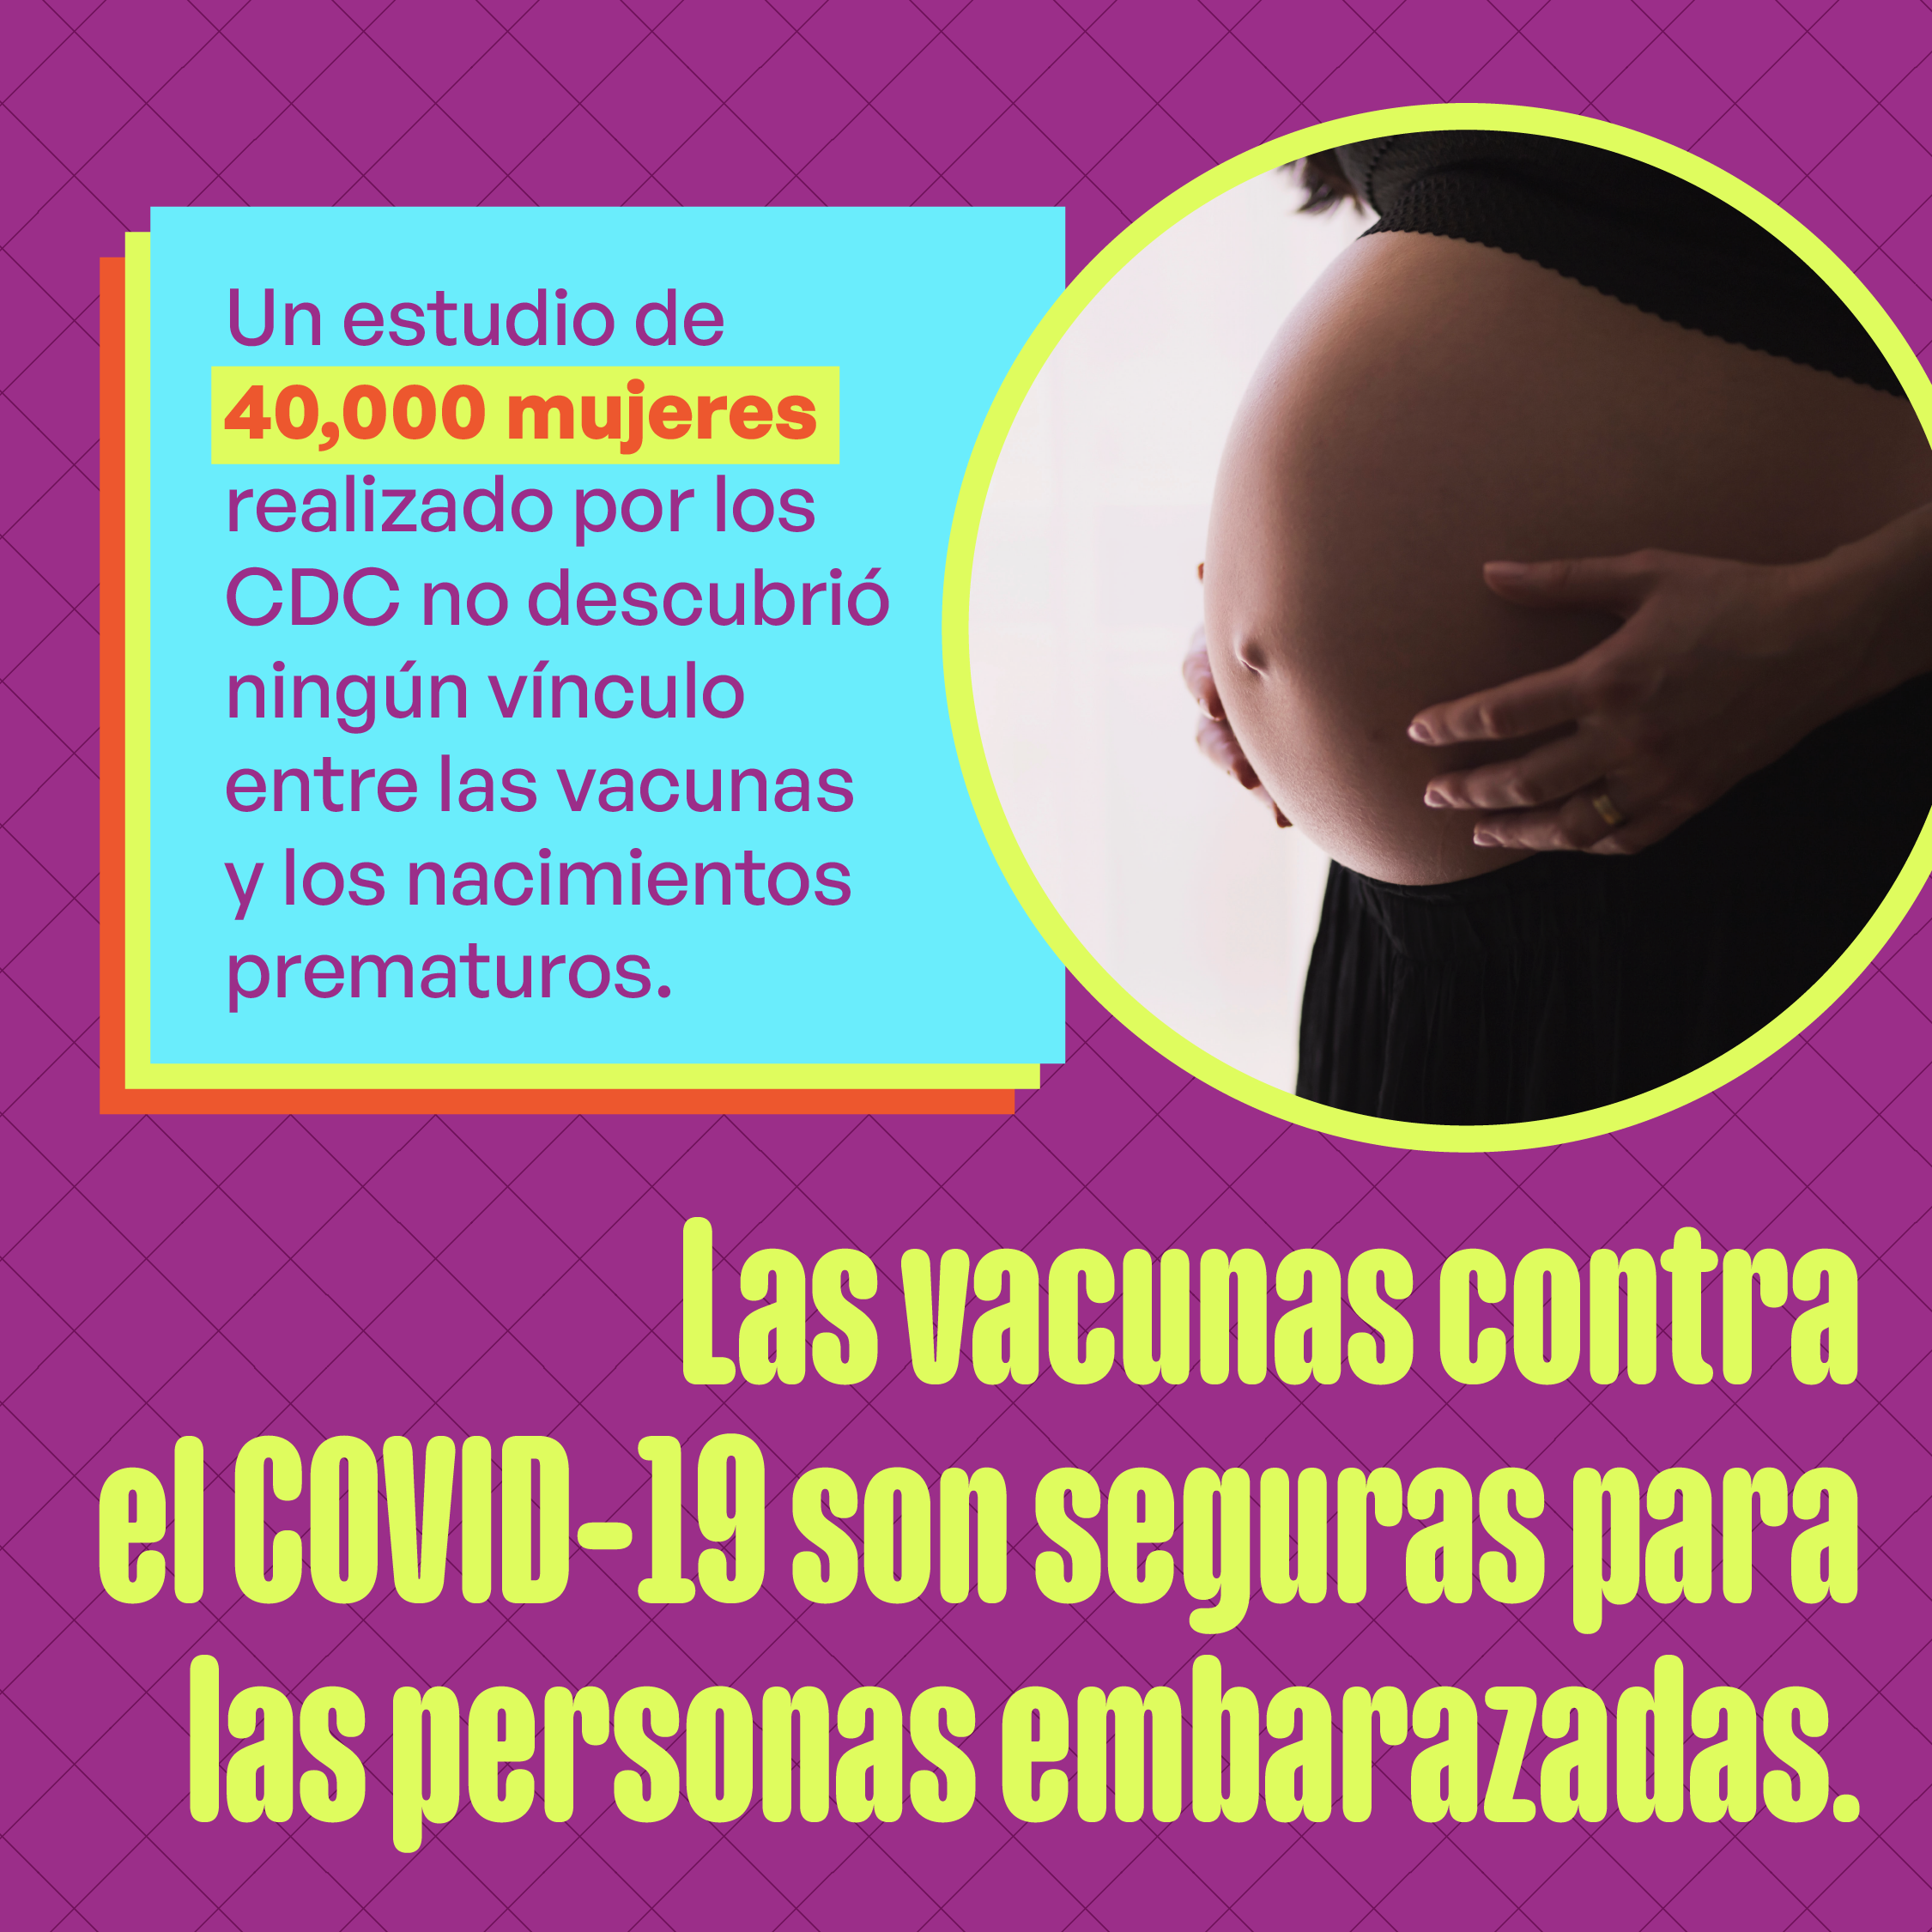 Image of a pregnant person's stomach with their hands cradling it with phrase "A CDC study of 40,000 women found that vaccines had no link to preterm births. COVID-19 vaccines are safe for pregnant people."